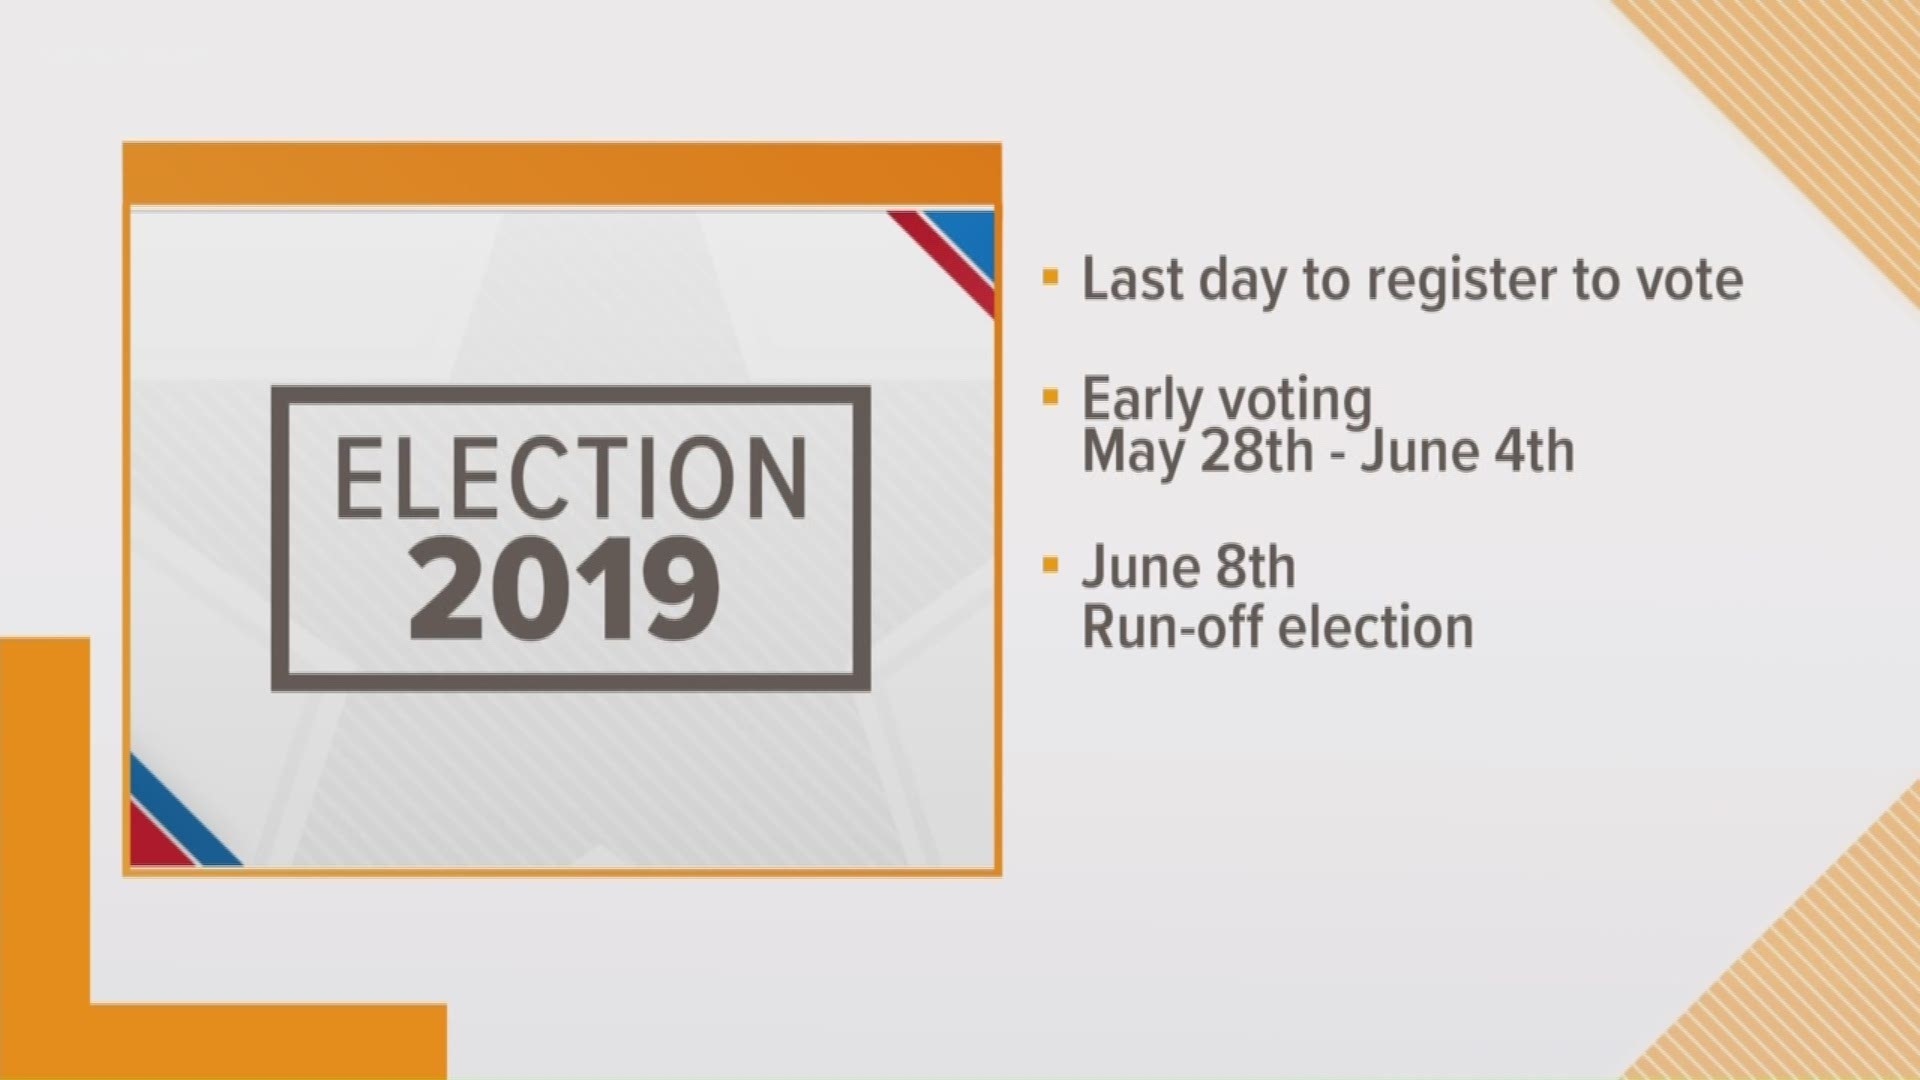 Thursday, May 9, is the last day to register to vote in the city election runoff. You can register to vote even if you were not registered to vote in the May 4 election.